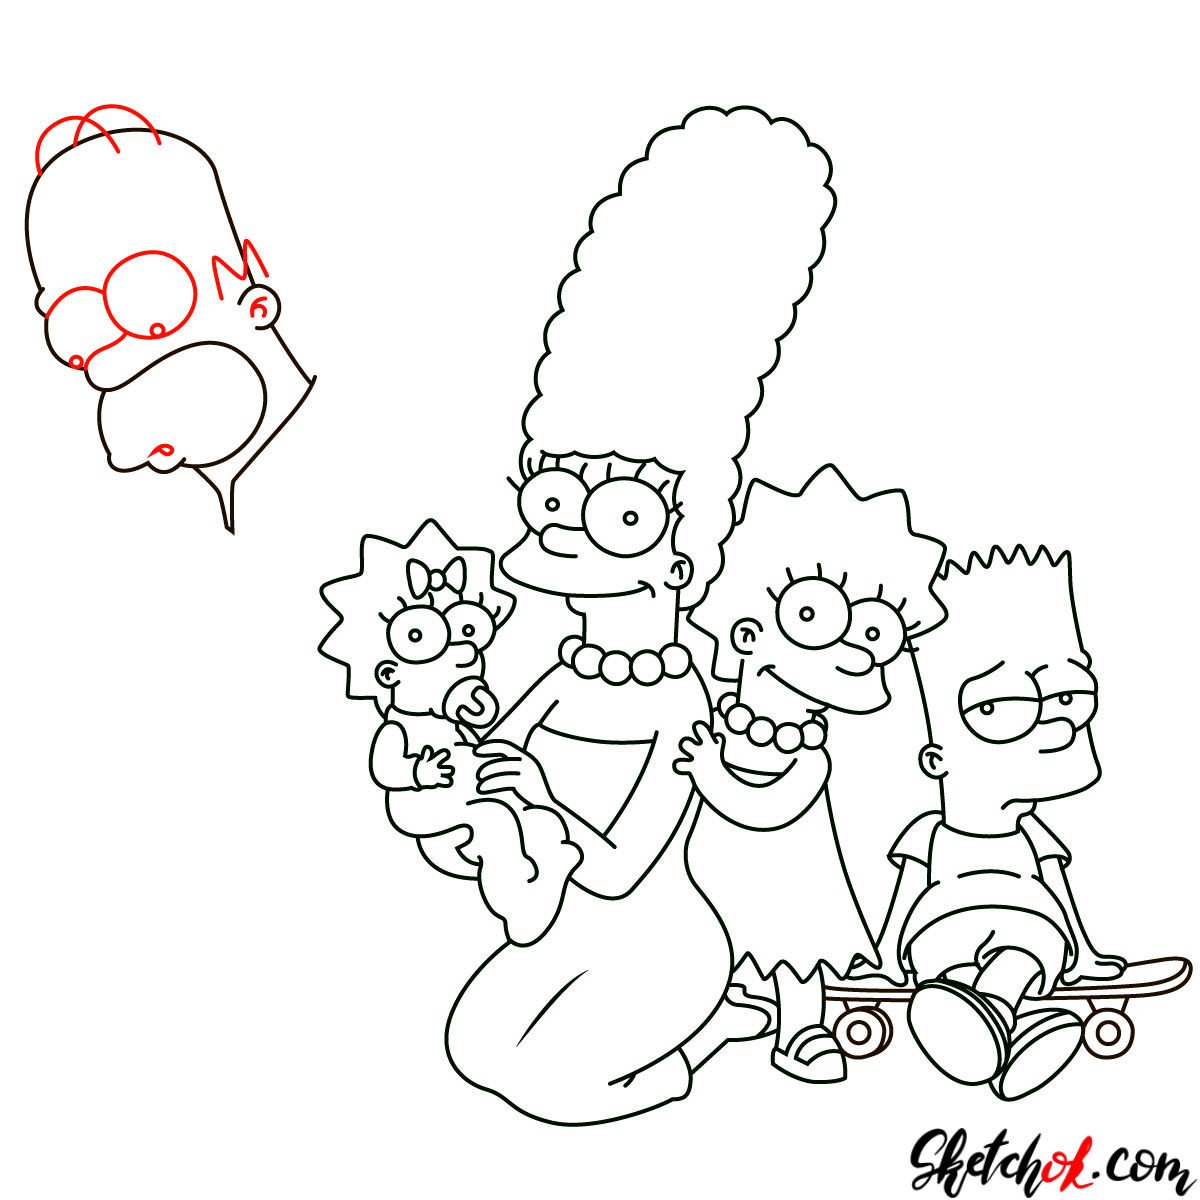 How to draw the Simpsons Family - step 25